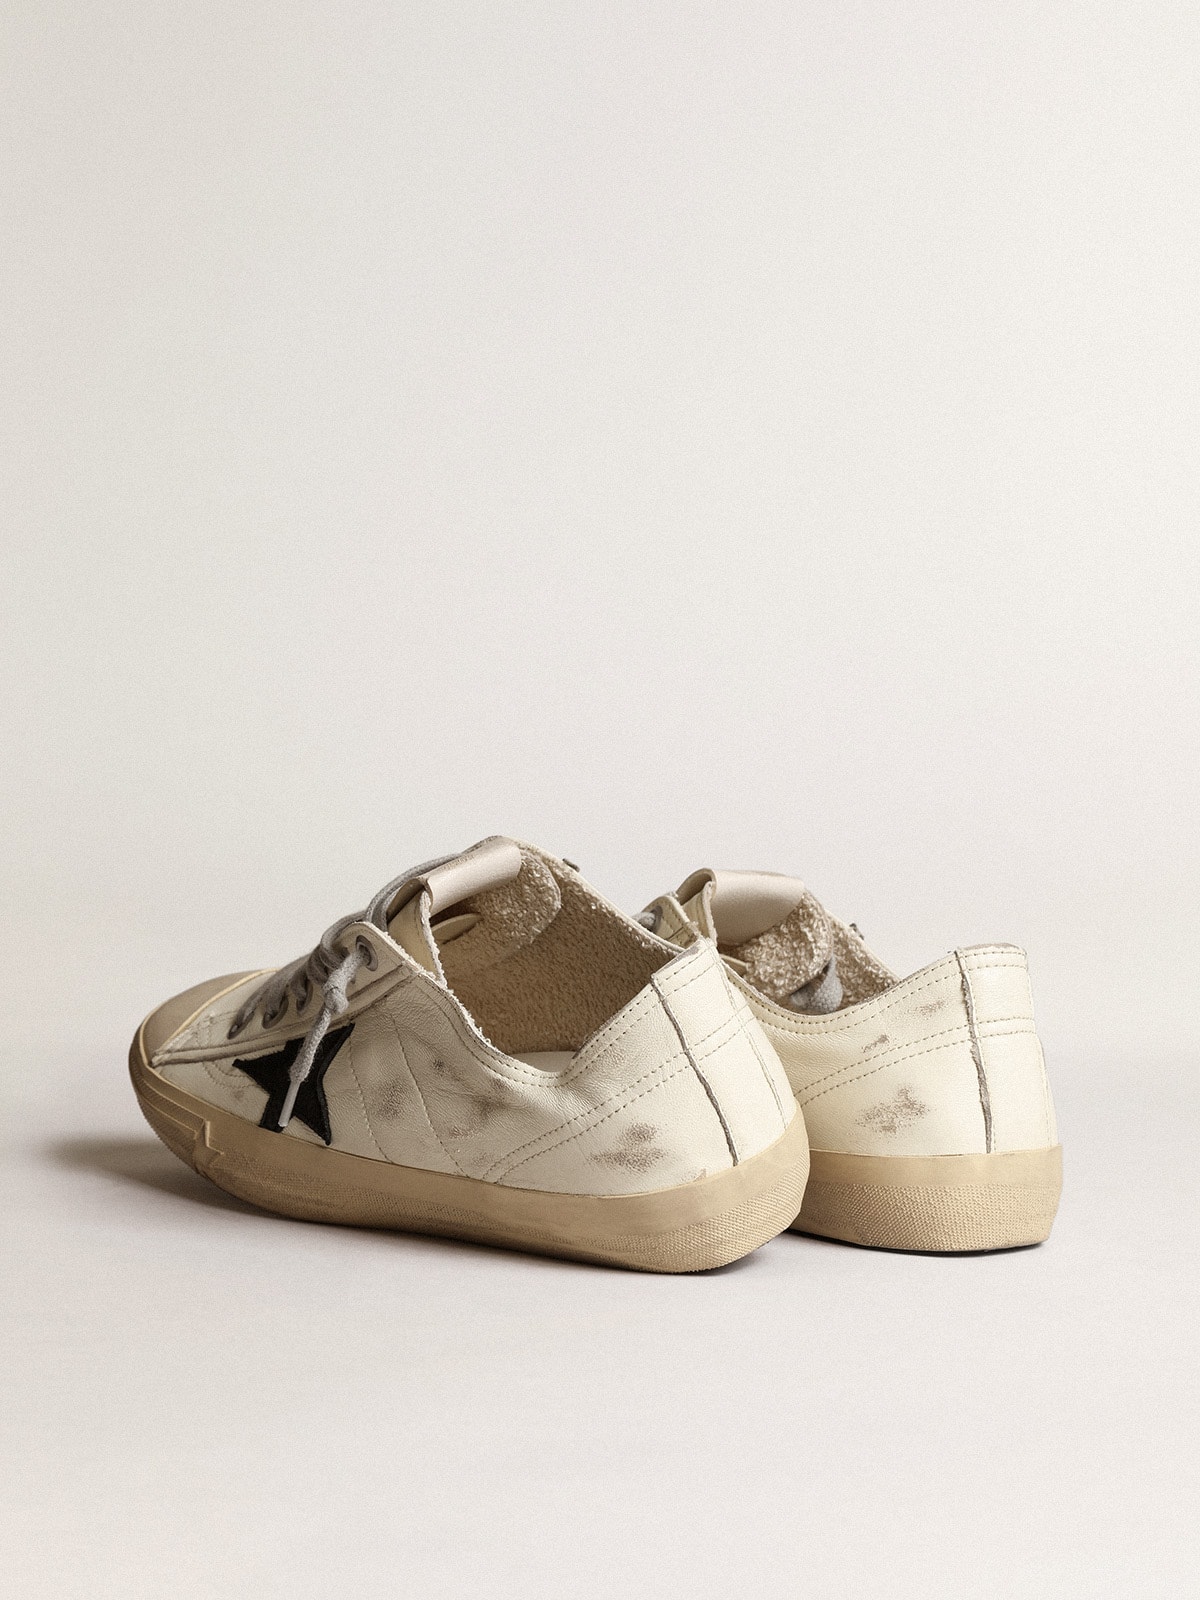 V-Star sneakers in off-white nappa leather with black nubuck star ...